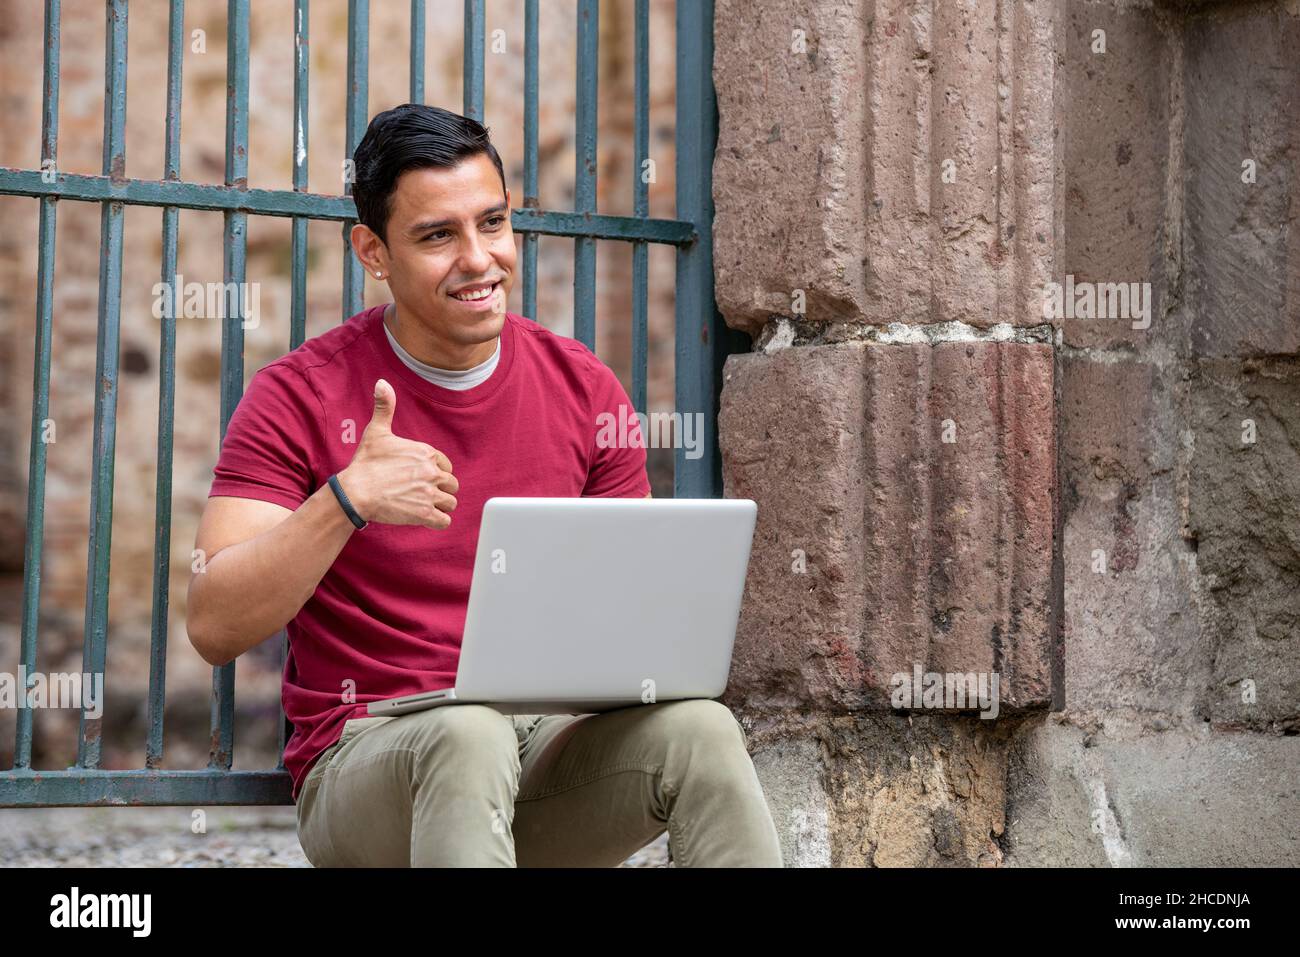 Young latino men with laptop on the street, Panama City, Central America Stock Photo